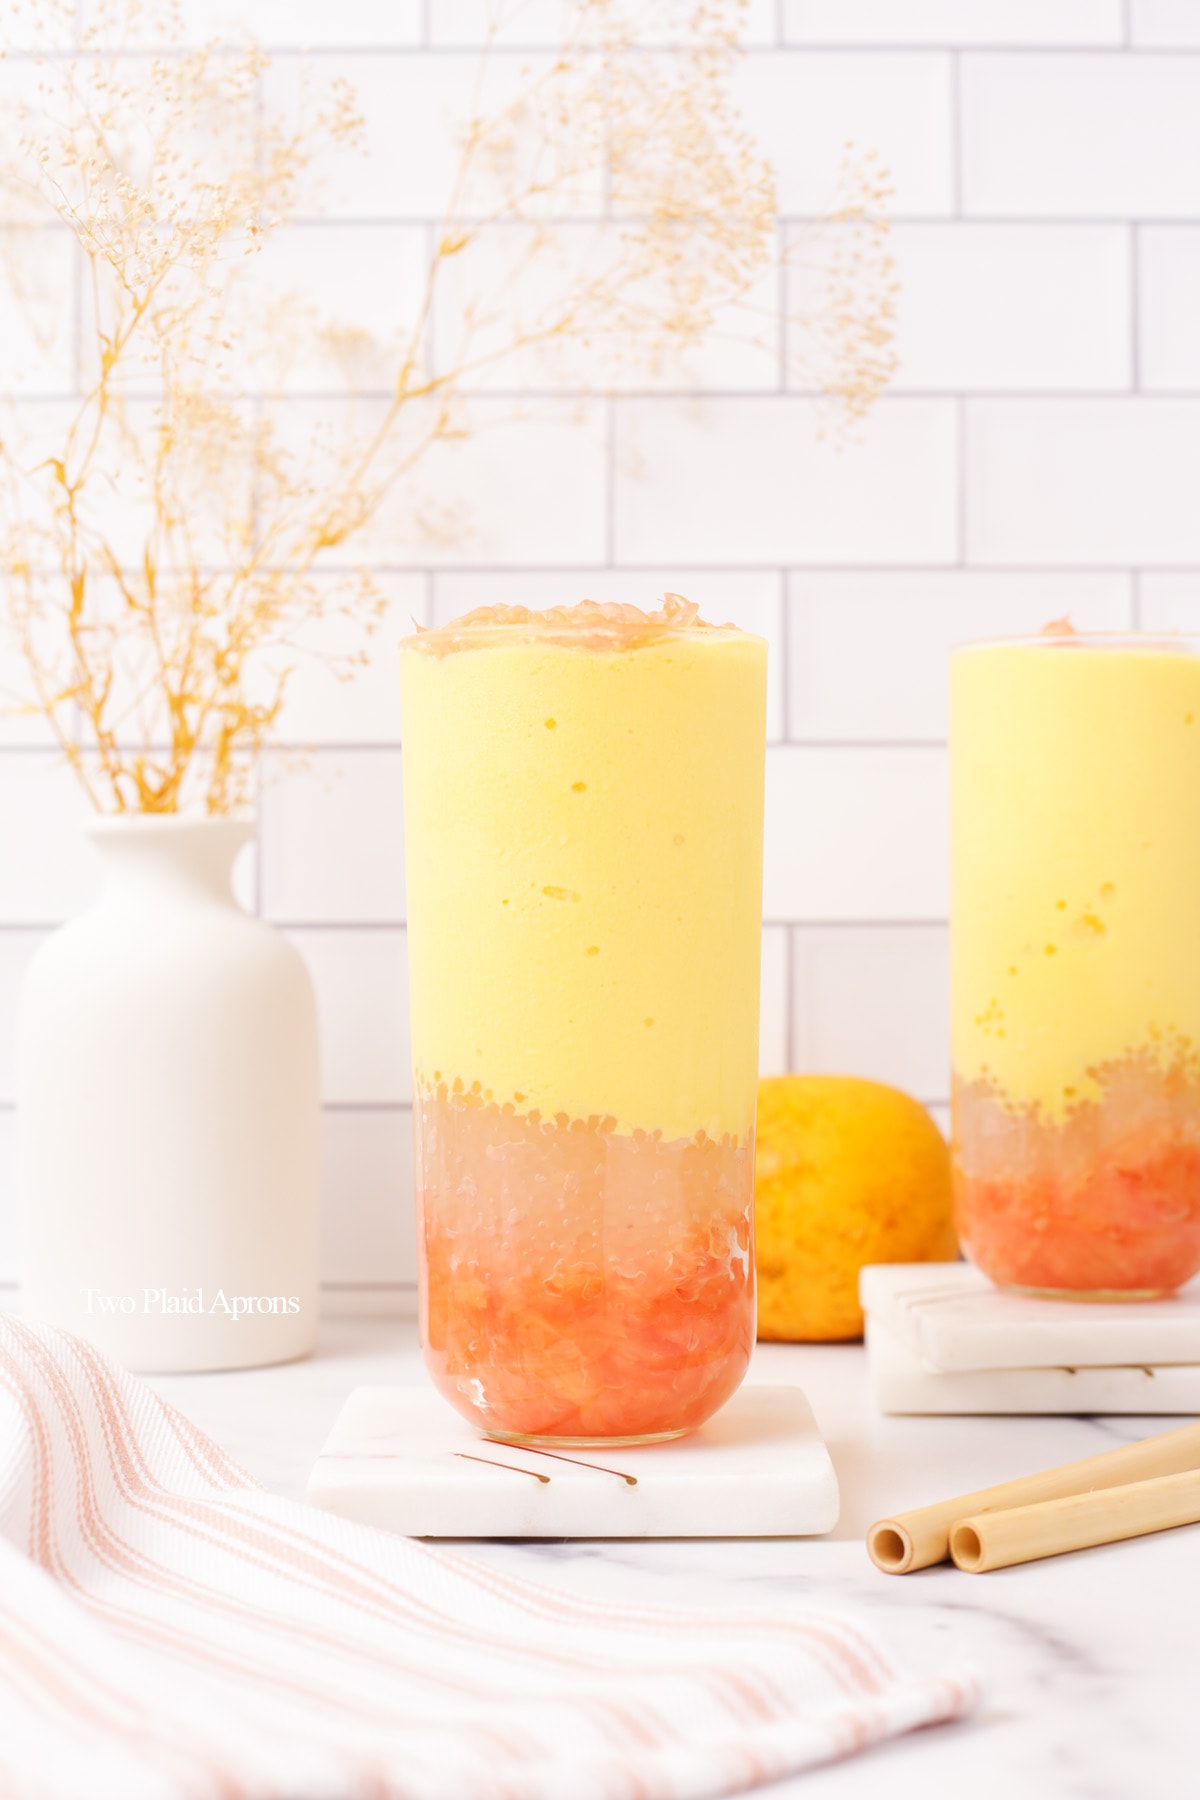 Mango pomelo sago layered in a cup.